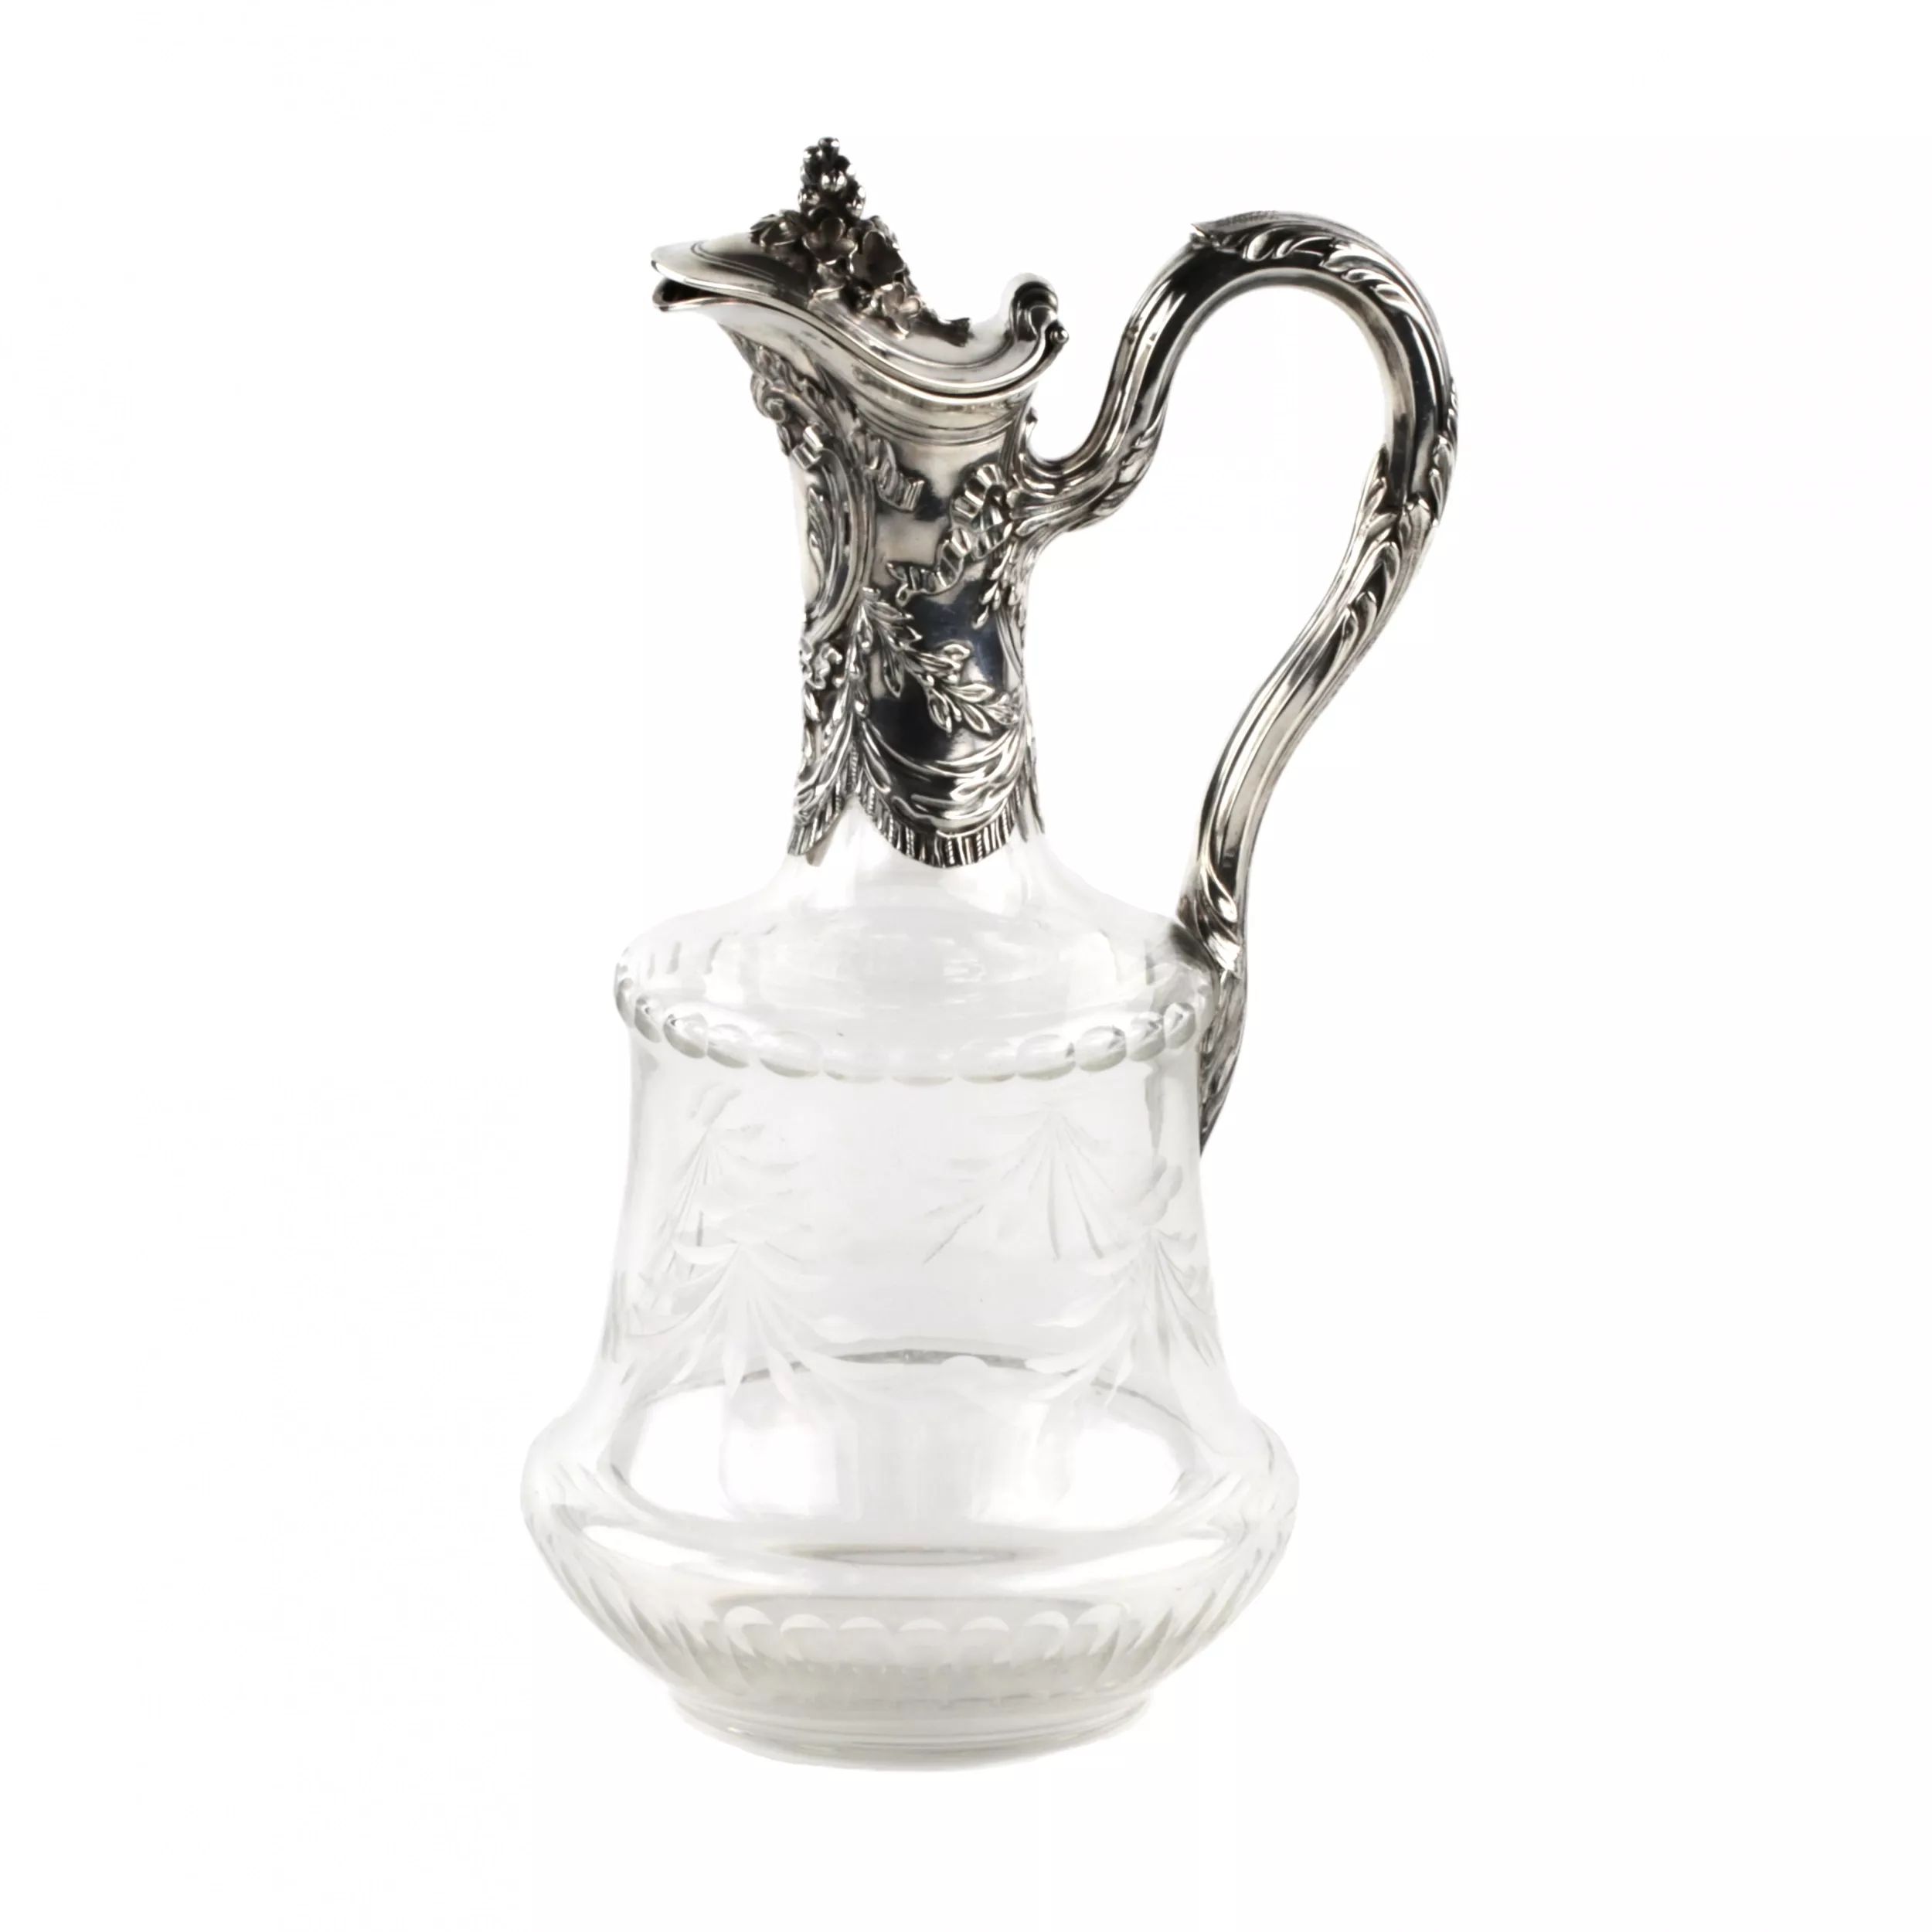 A-jug-for-wine-glass-with-silver-